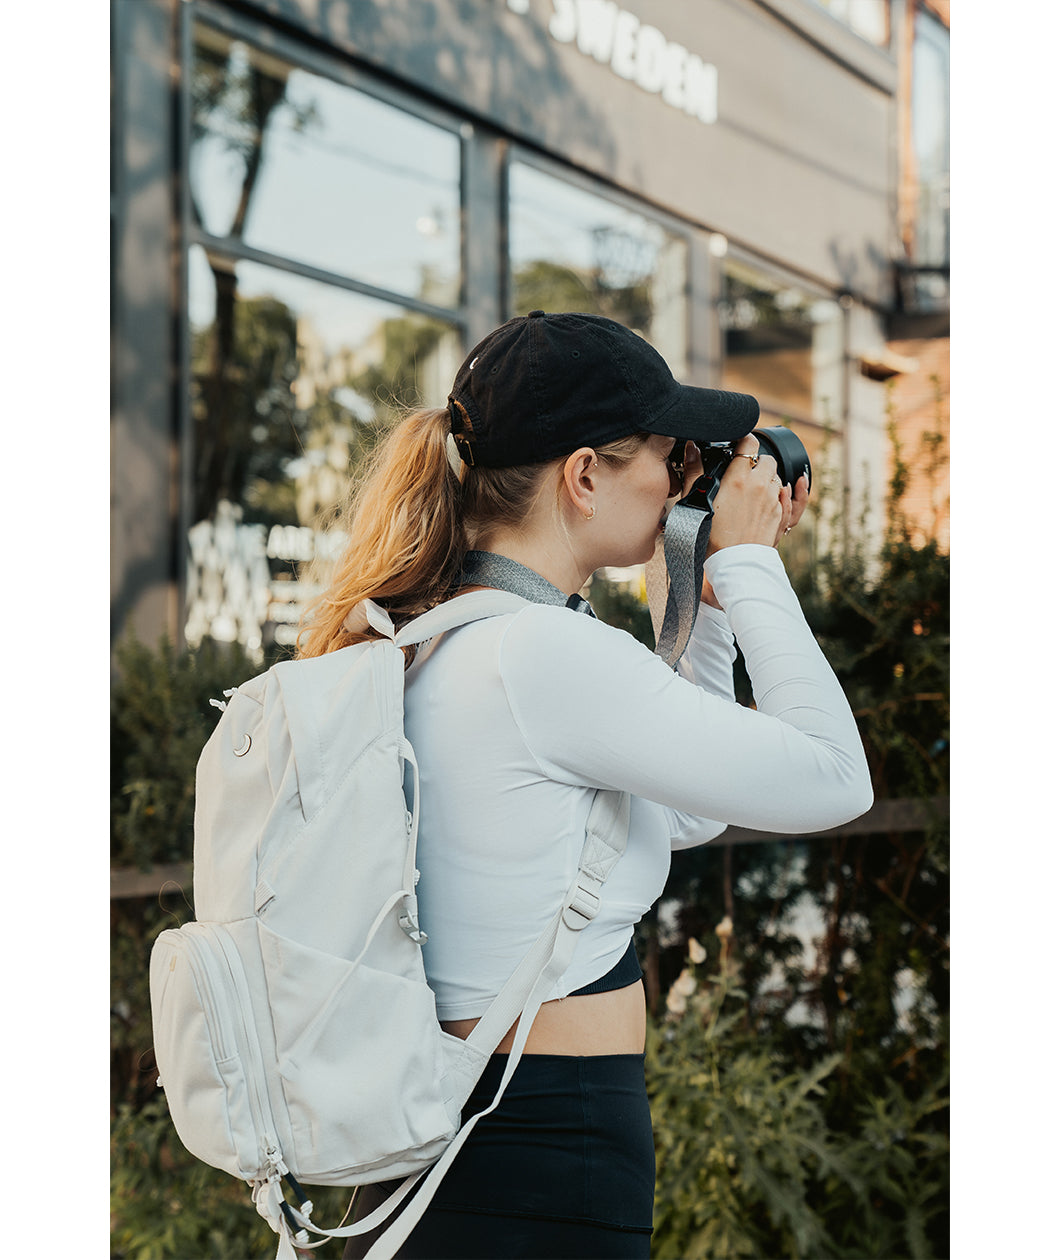 Lizzie Peirce wearing a hat, a backpack and holding a camera to her face.